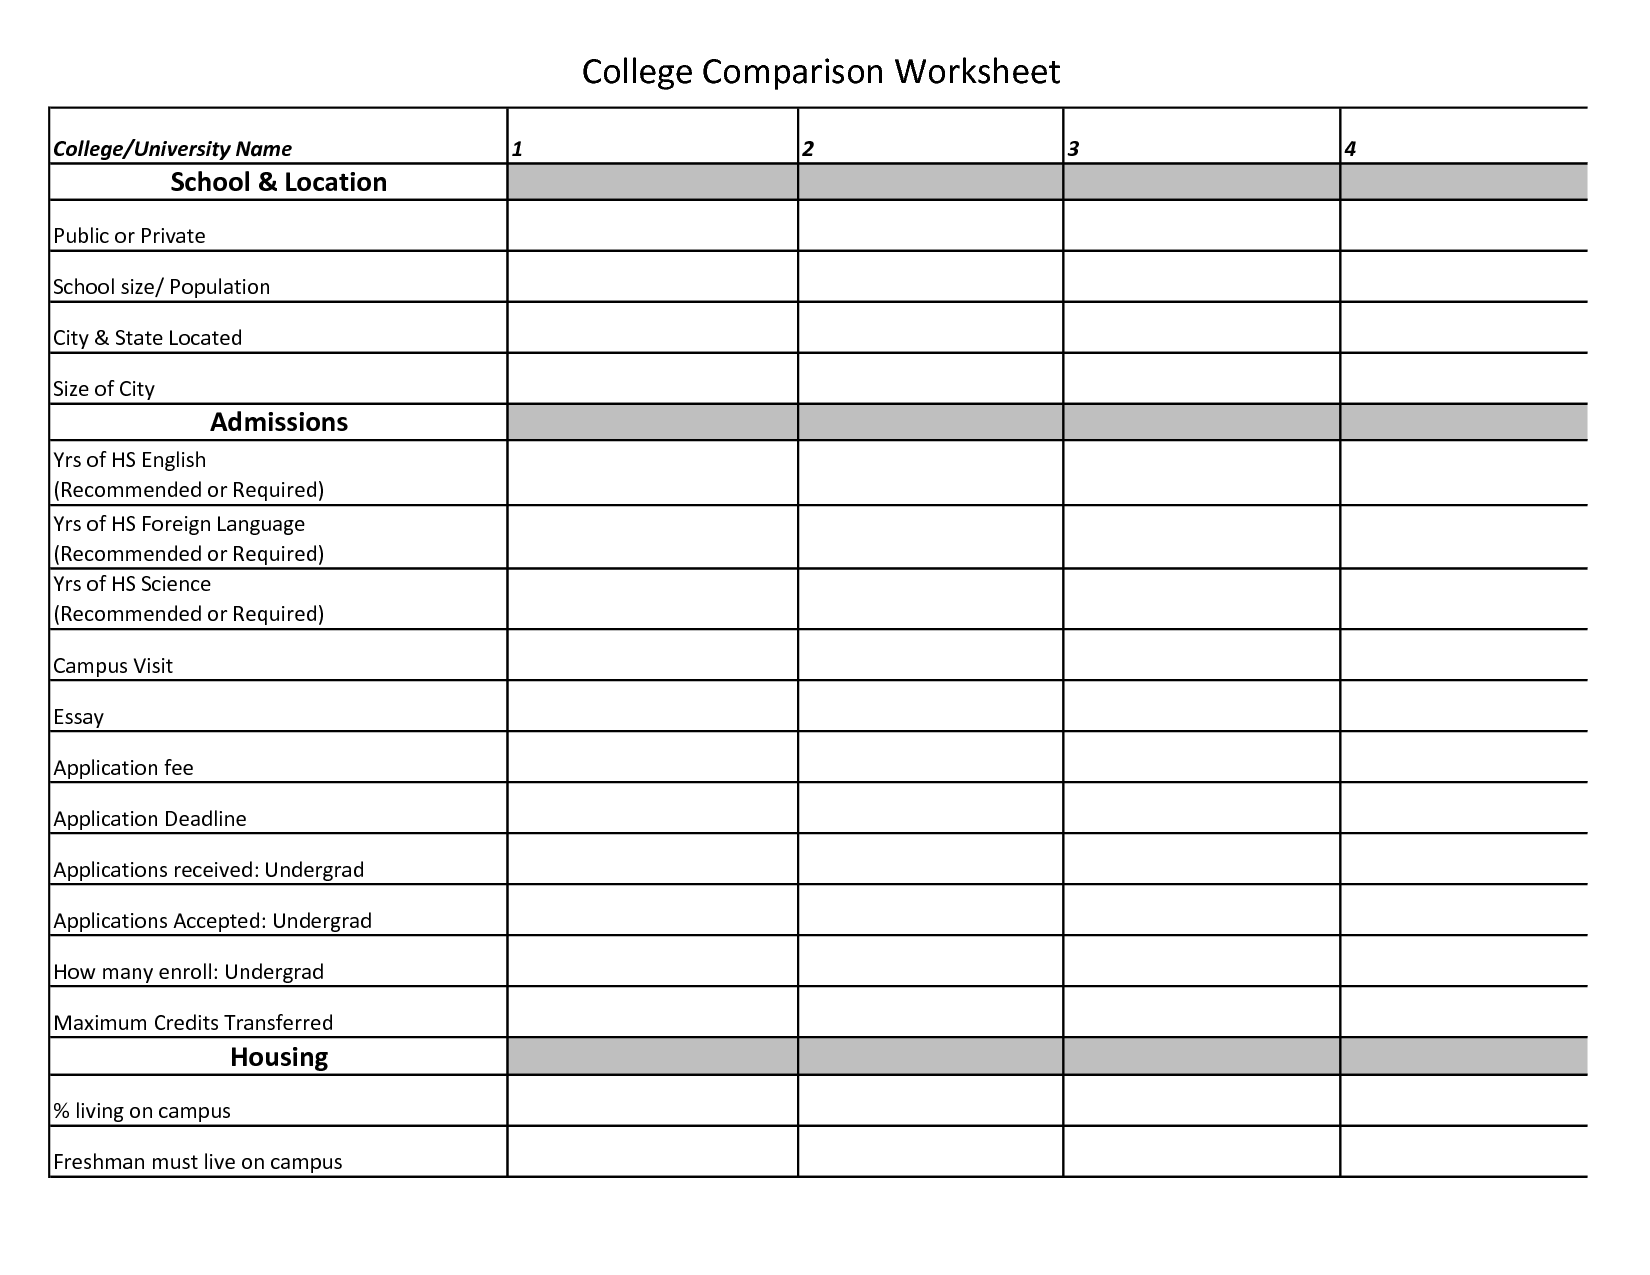 8-best-images-of-college-english-worksheet-printable-college-english-worksheets-college